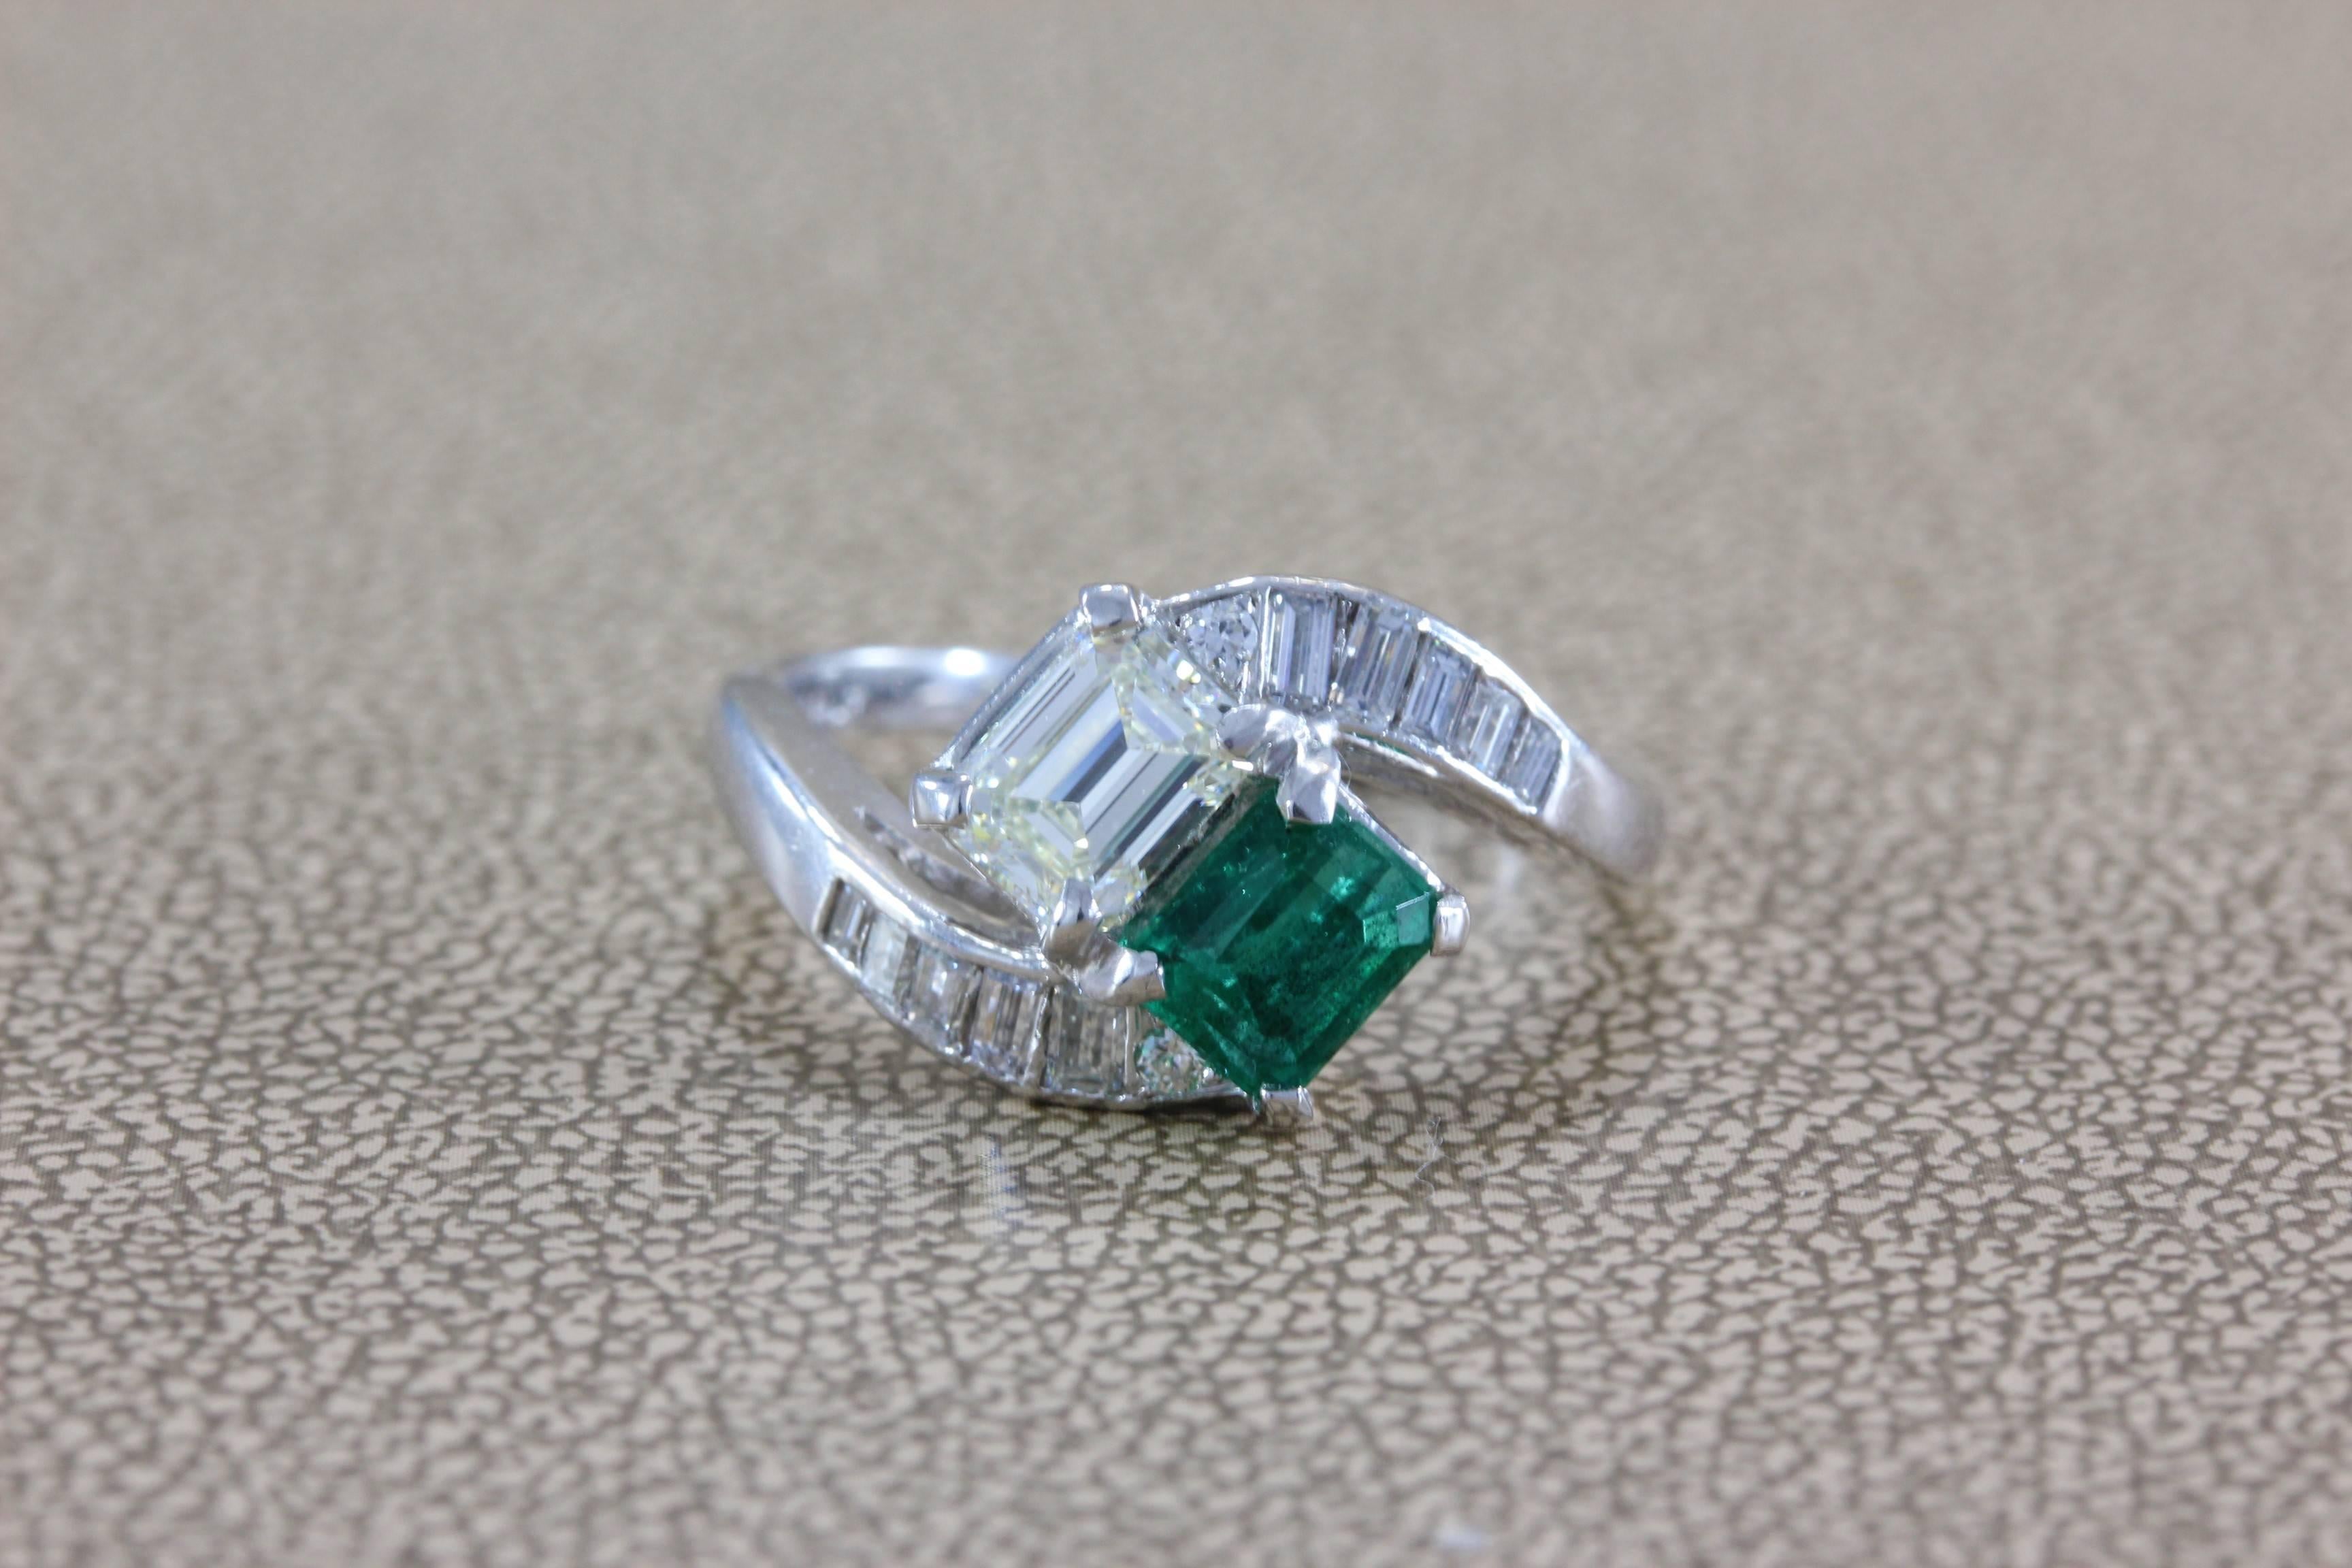 A sleek bypass ring featuring a 0.70 carat emerald cut diamond and a 0.60 carat vivid green emerald, which are complemented by 1.10 carats of baguette cut diamonds set in the shoulders of the ring in platinum. 

Size 6.5 (sizable)
